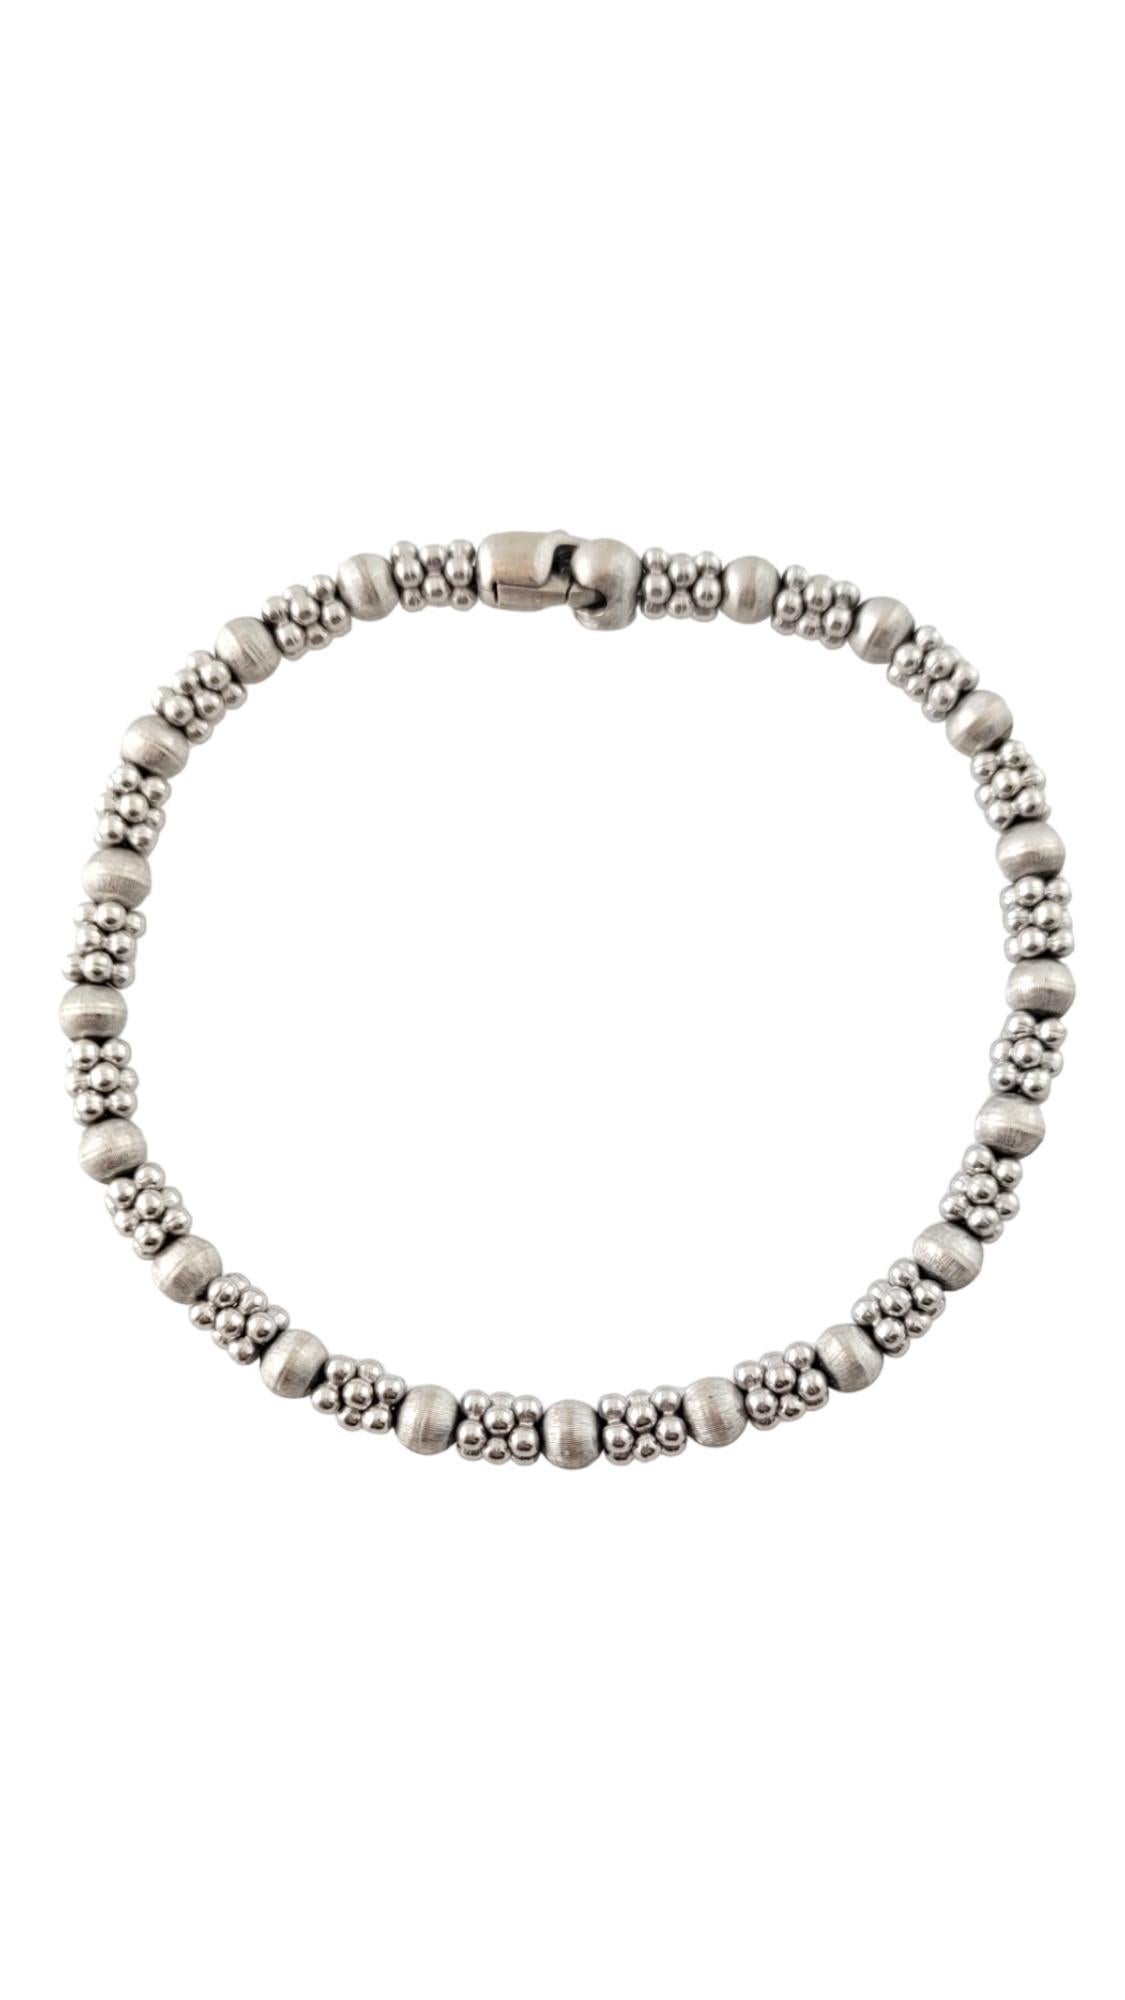 Marco Bicego 18K White Gold Beaded Bracelet

This gorgeous piece is crafted from 18K white gold and has a unique pattern that will look stunning on you!

Size: 7